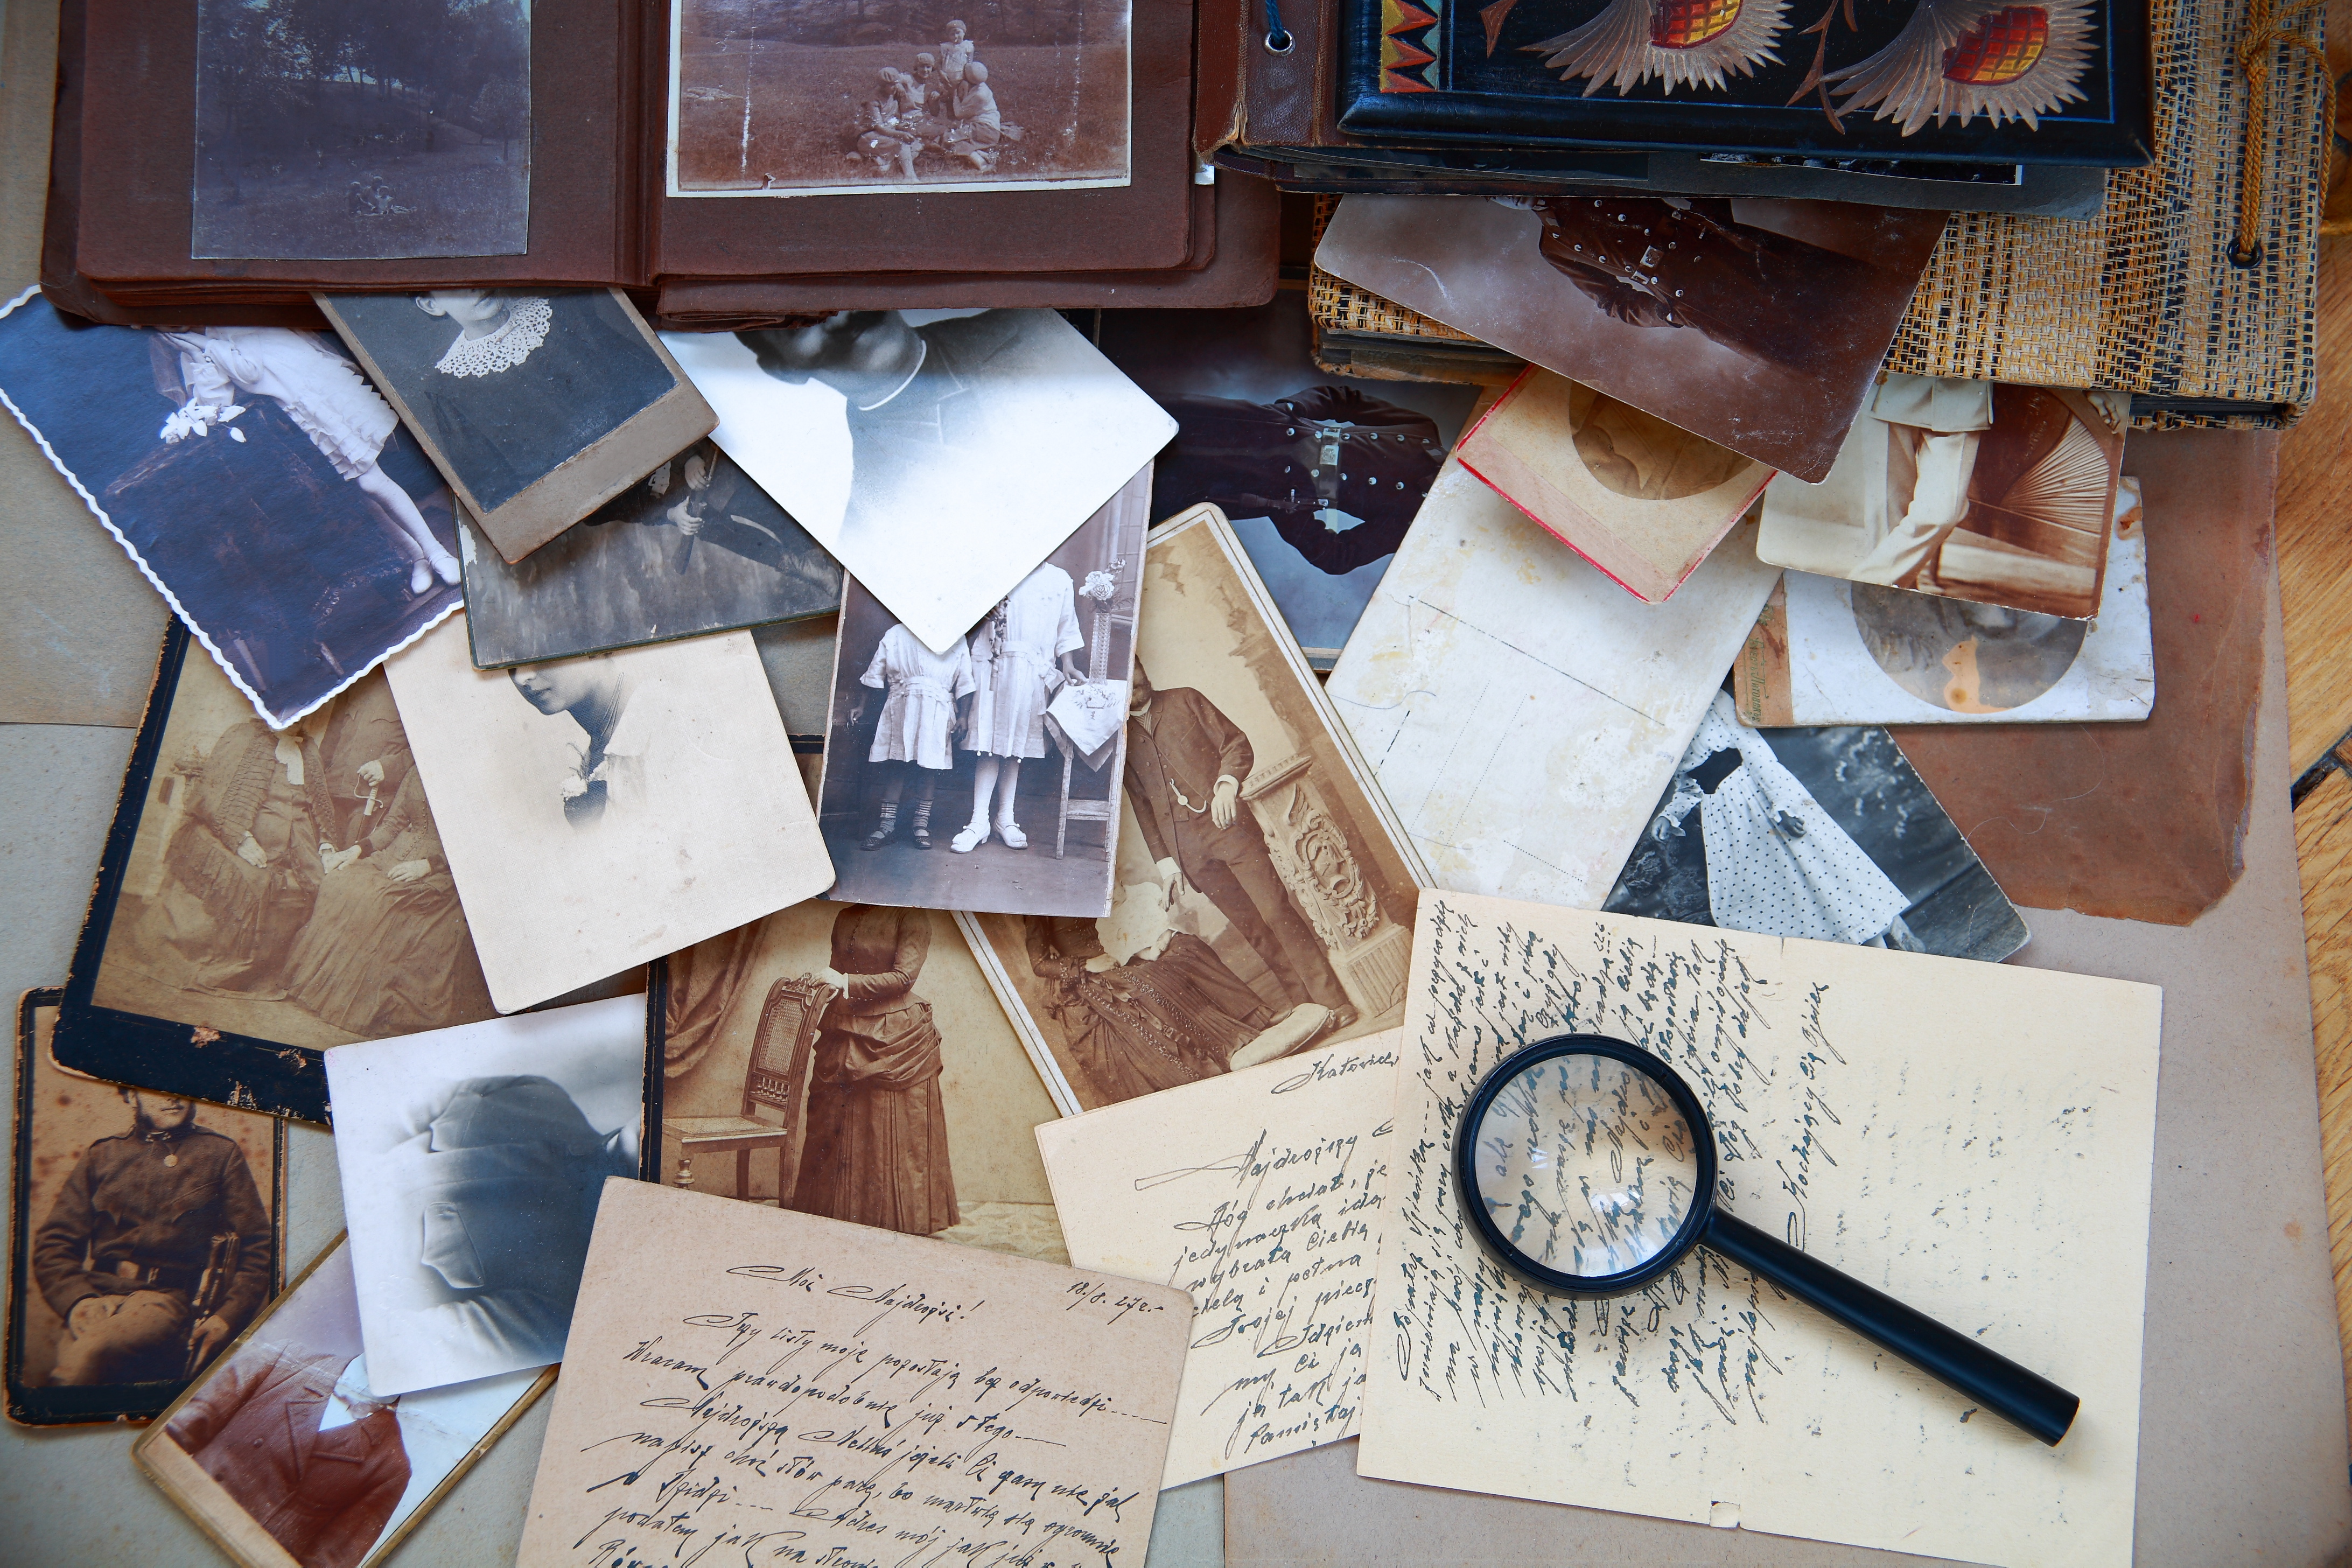 photos, letters, magnifying glass, and other sentimental items